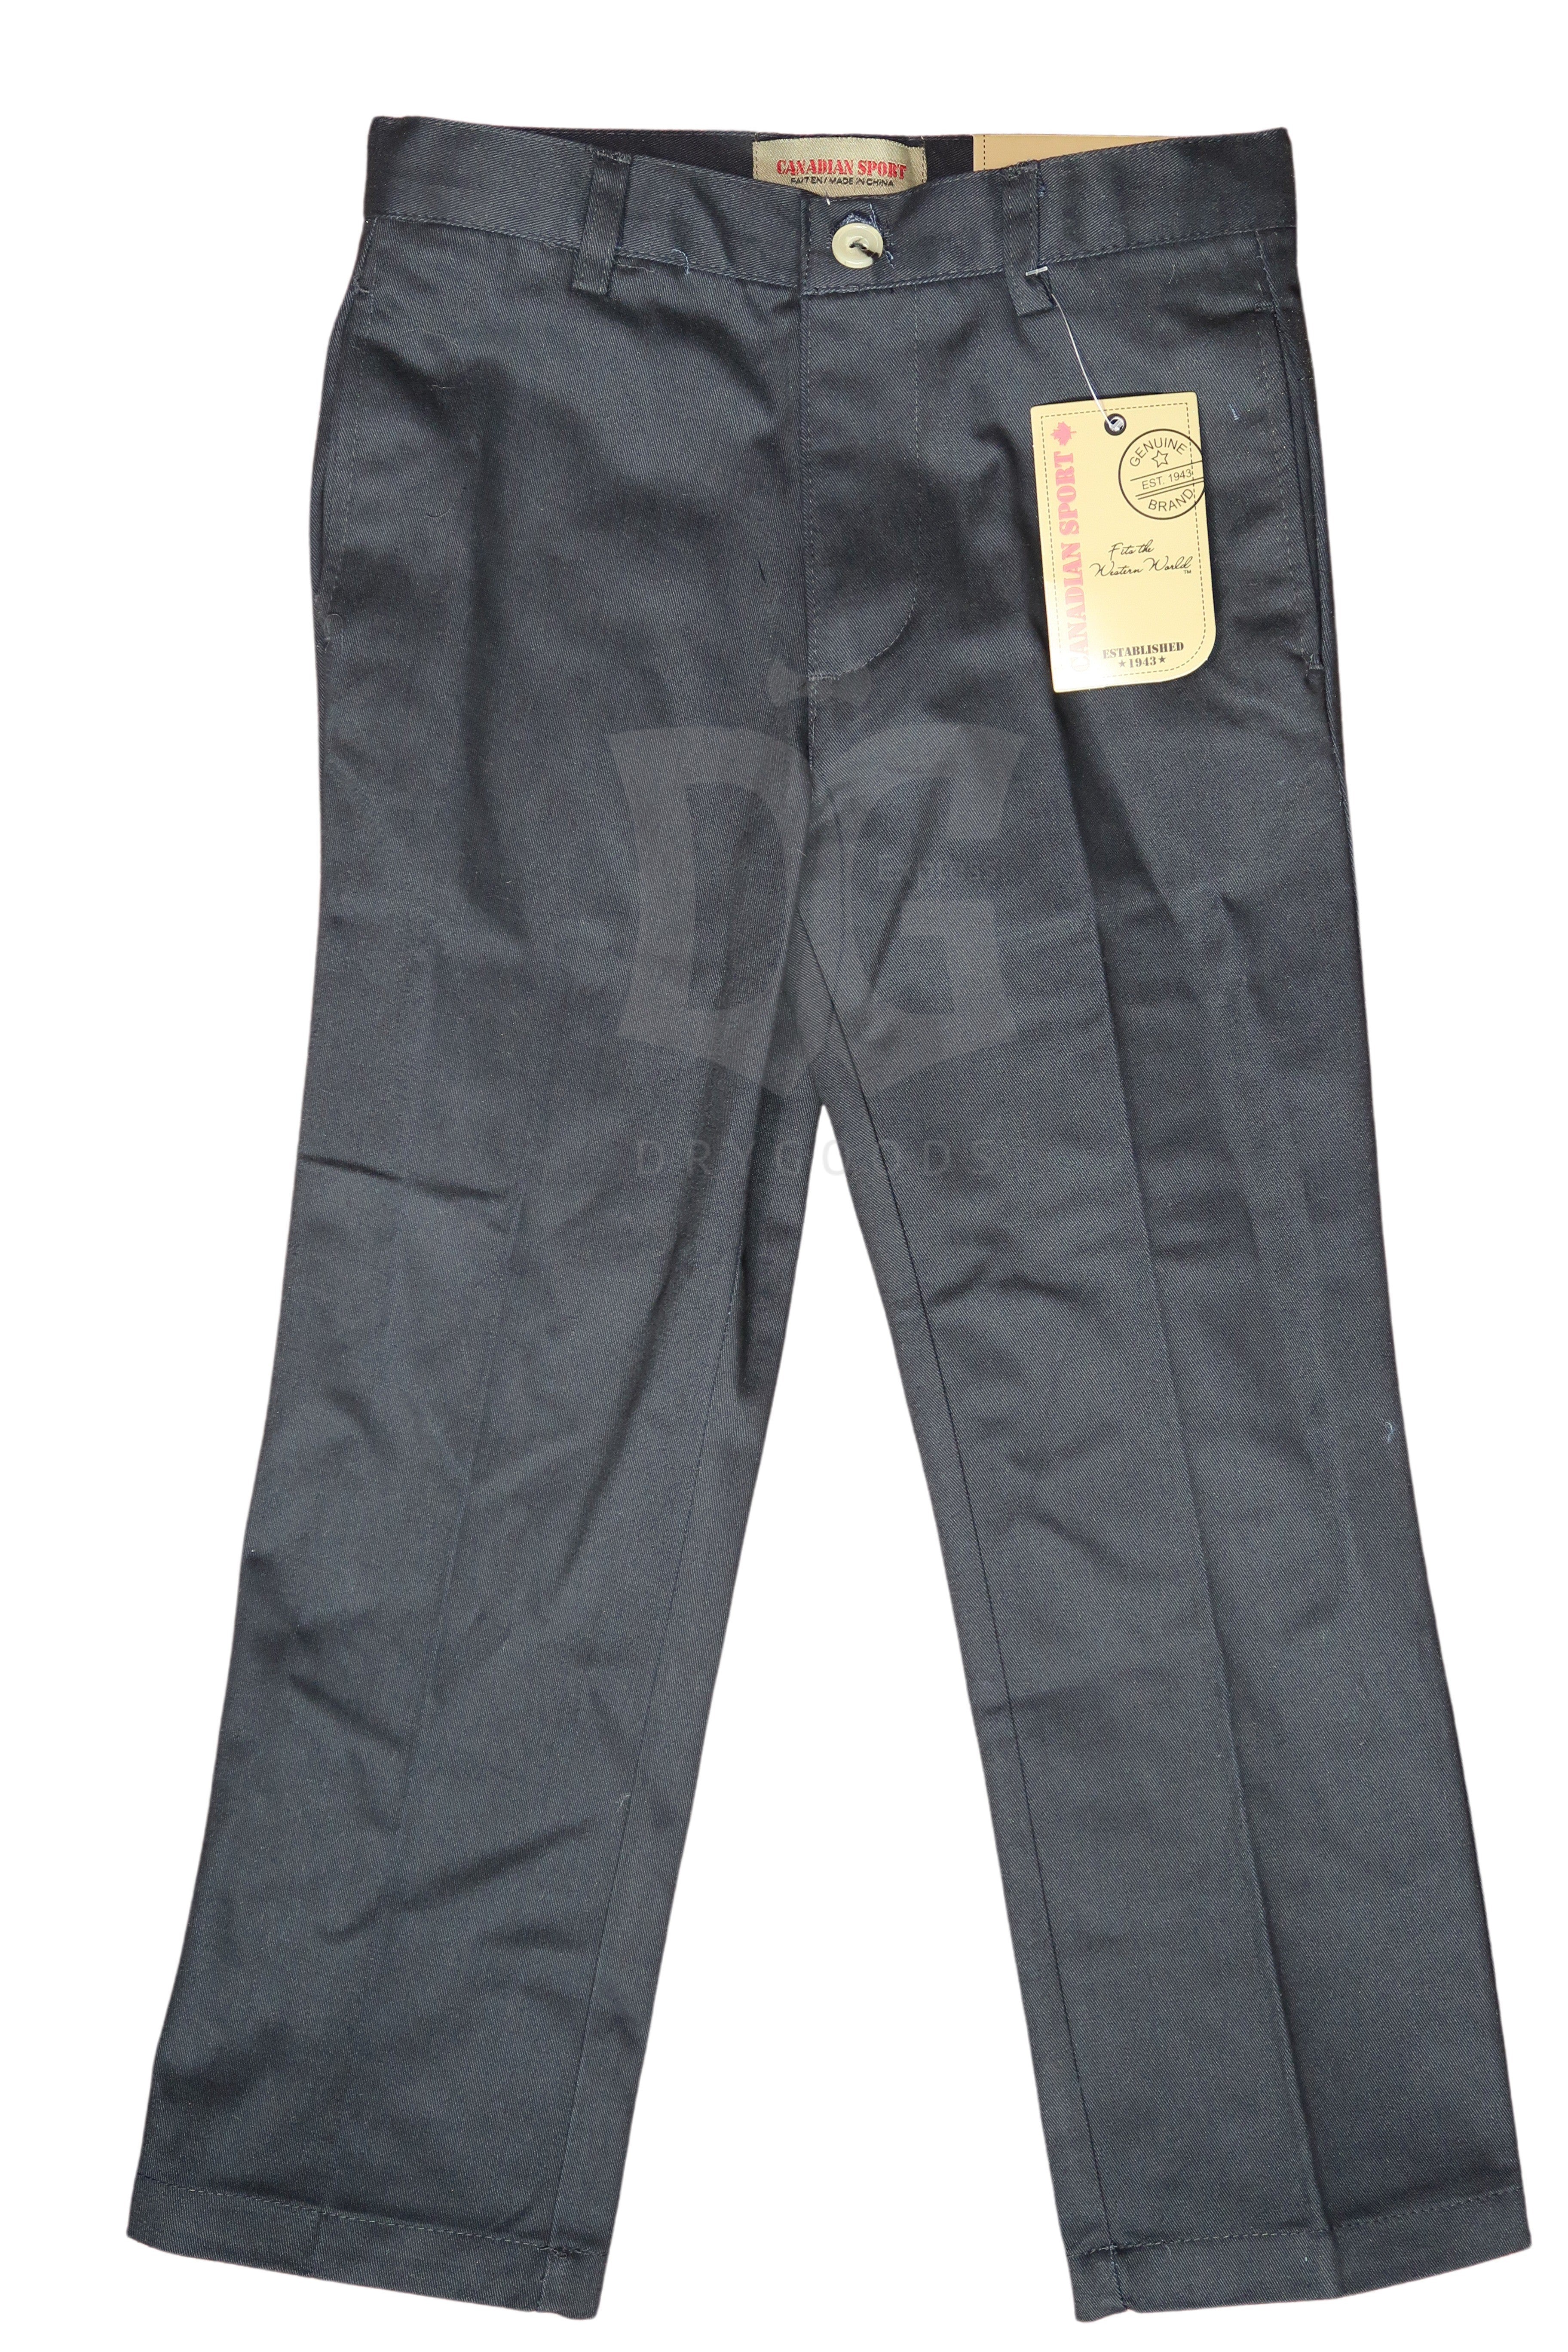 Canadian Polo Boys Weekday Pants Slim Fit